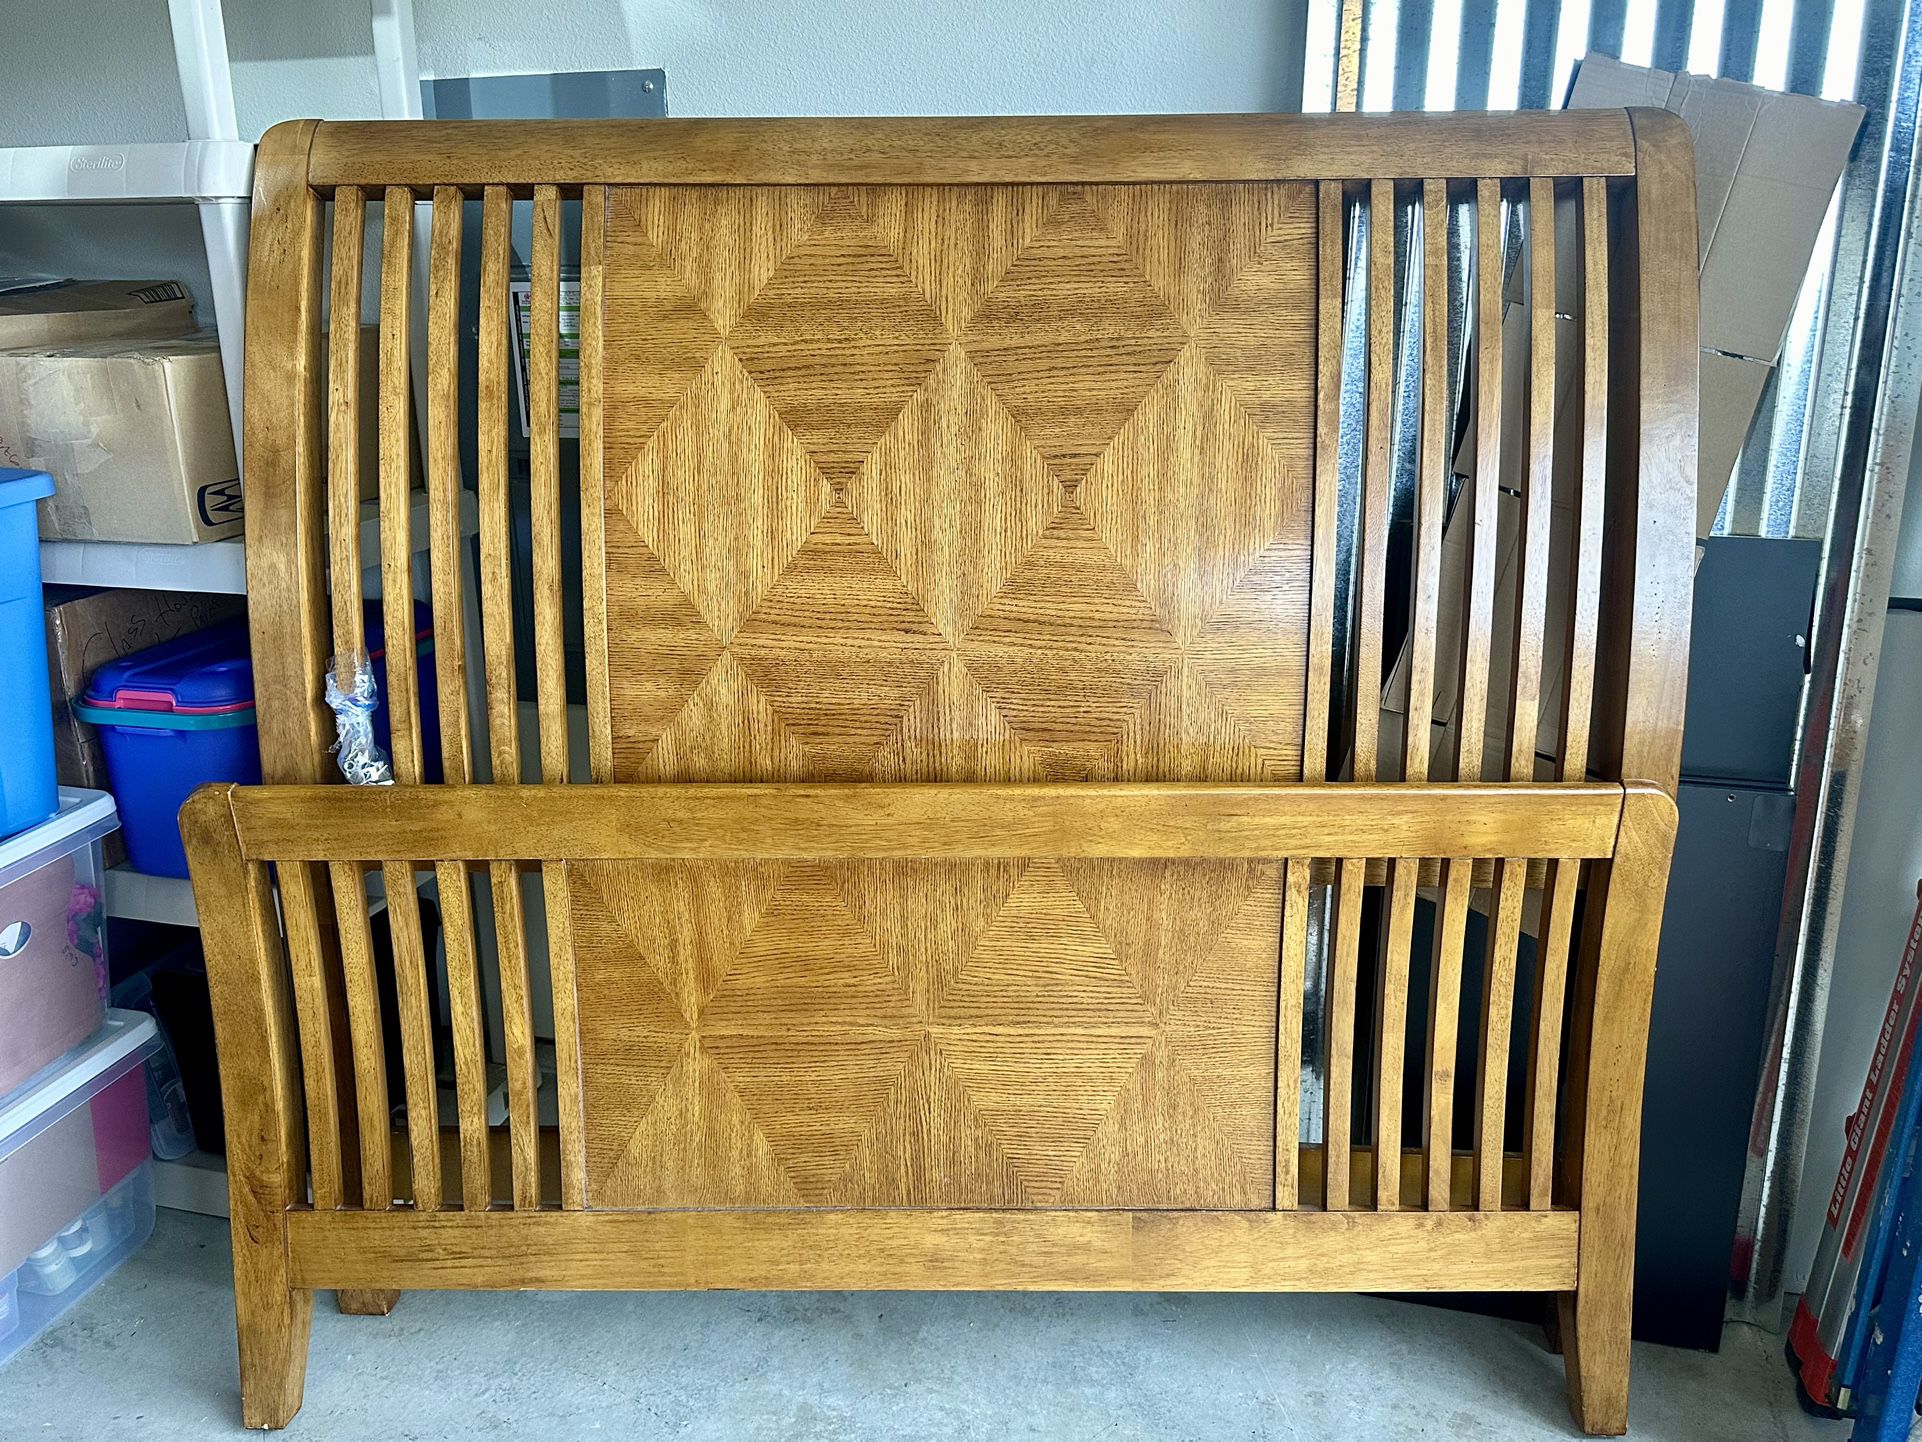 Queen Bedroom Set - Beautiful Solid Wood, Sleigh Style Bed, 2 Night Stands, Large Credenza W/Mirror (not Shown), Tall Dresser.